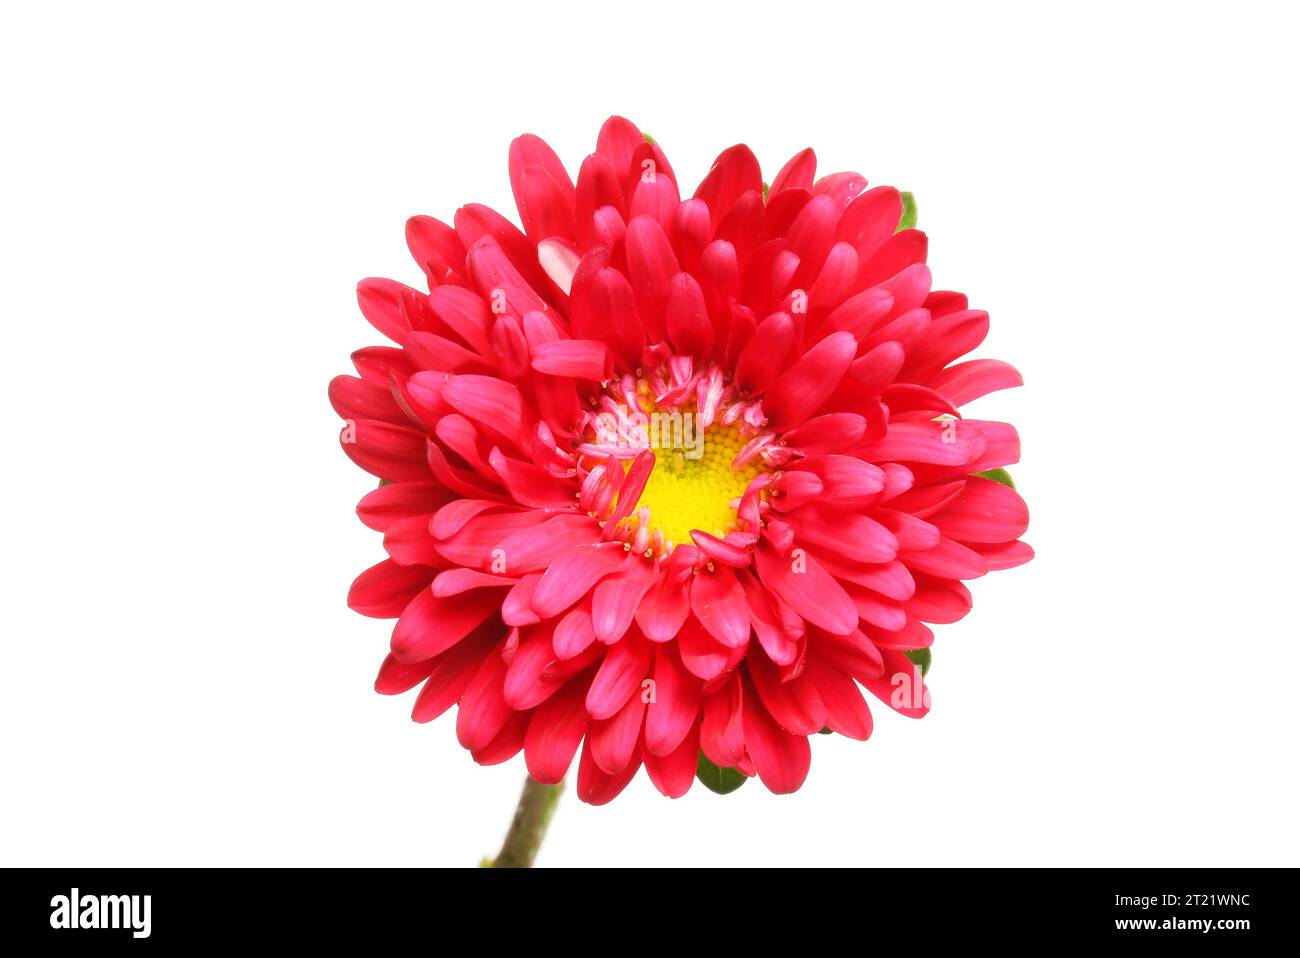 Red and yellow aster flower isolated against white Stock Photo